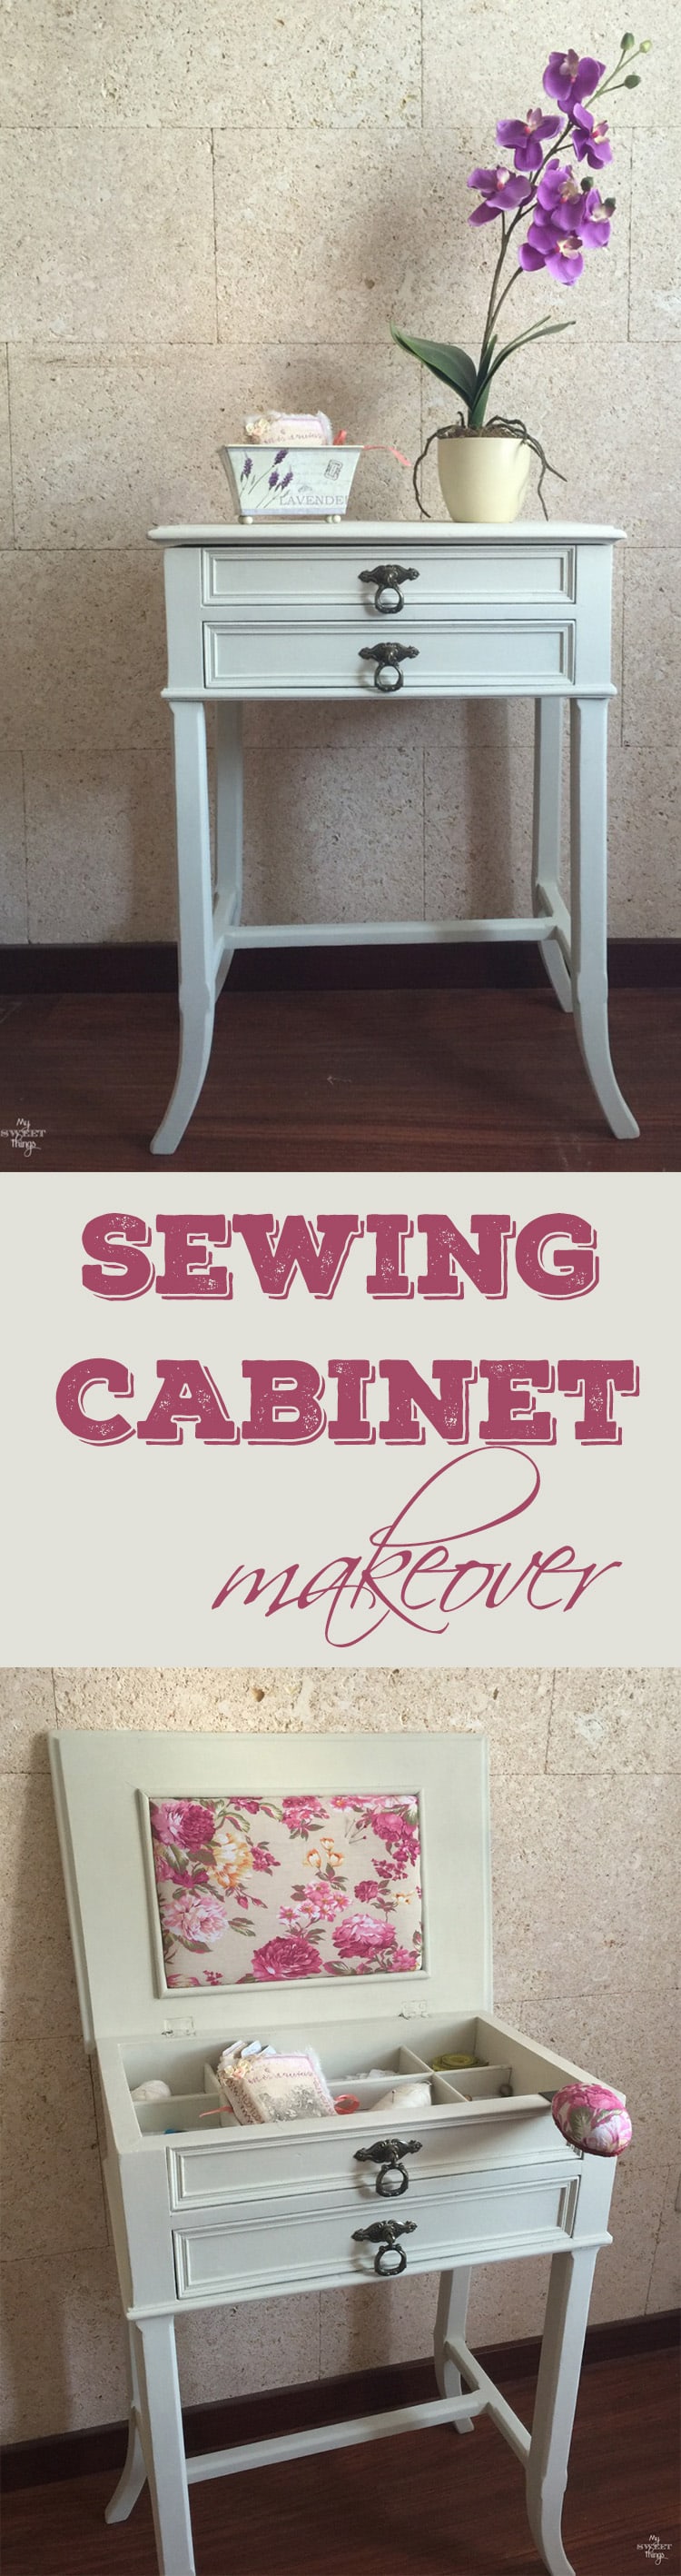 Sewing cabinet makeover from an old sewing cabinet with paint and some pretty fabric